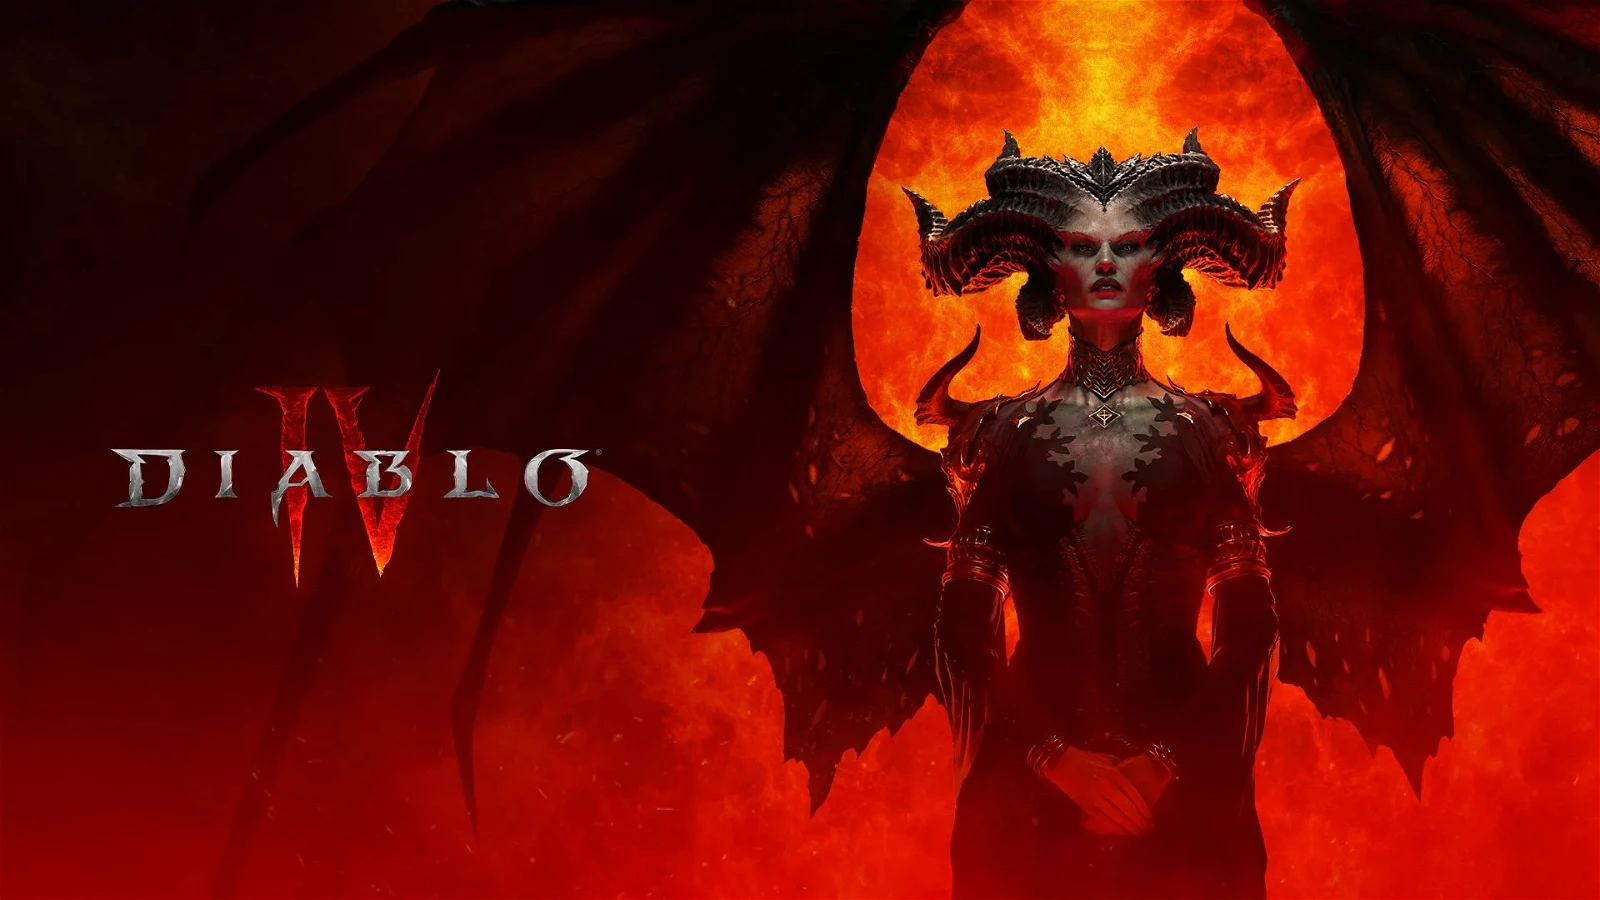 Diablo IV makes big changes to character classes in patch 1.0.3.